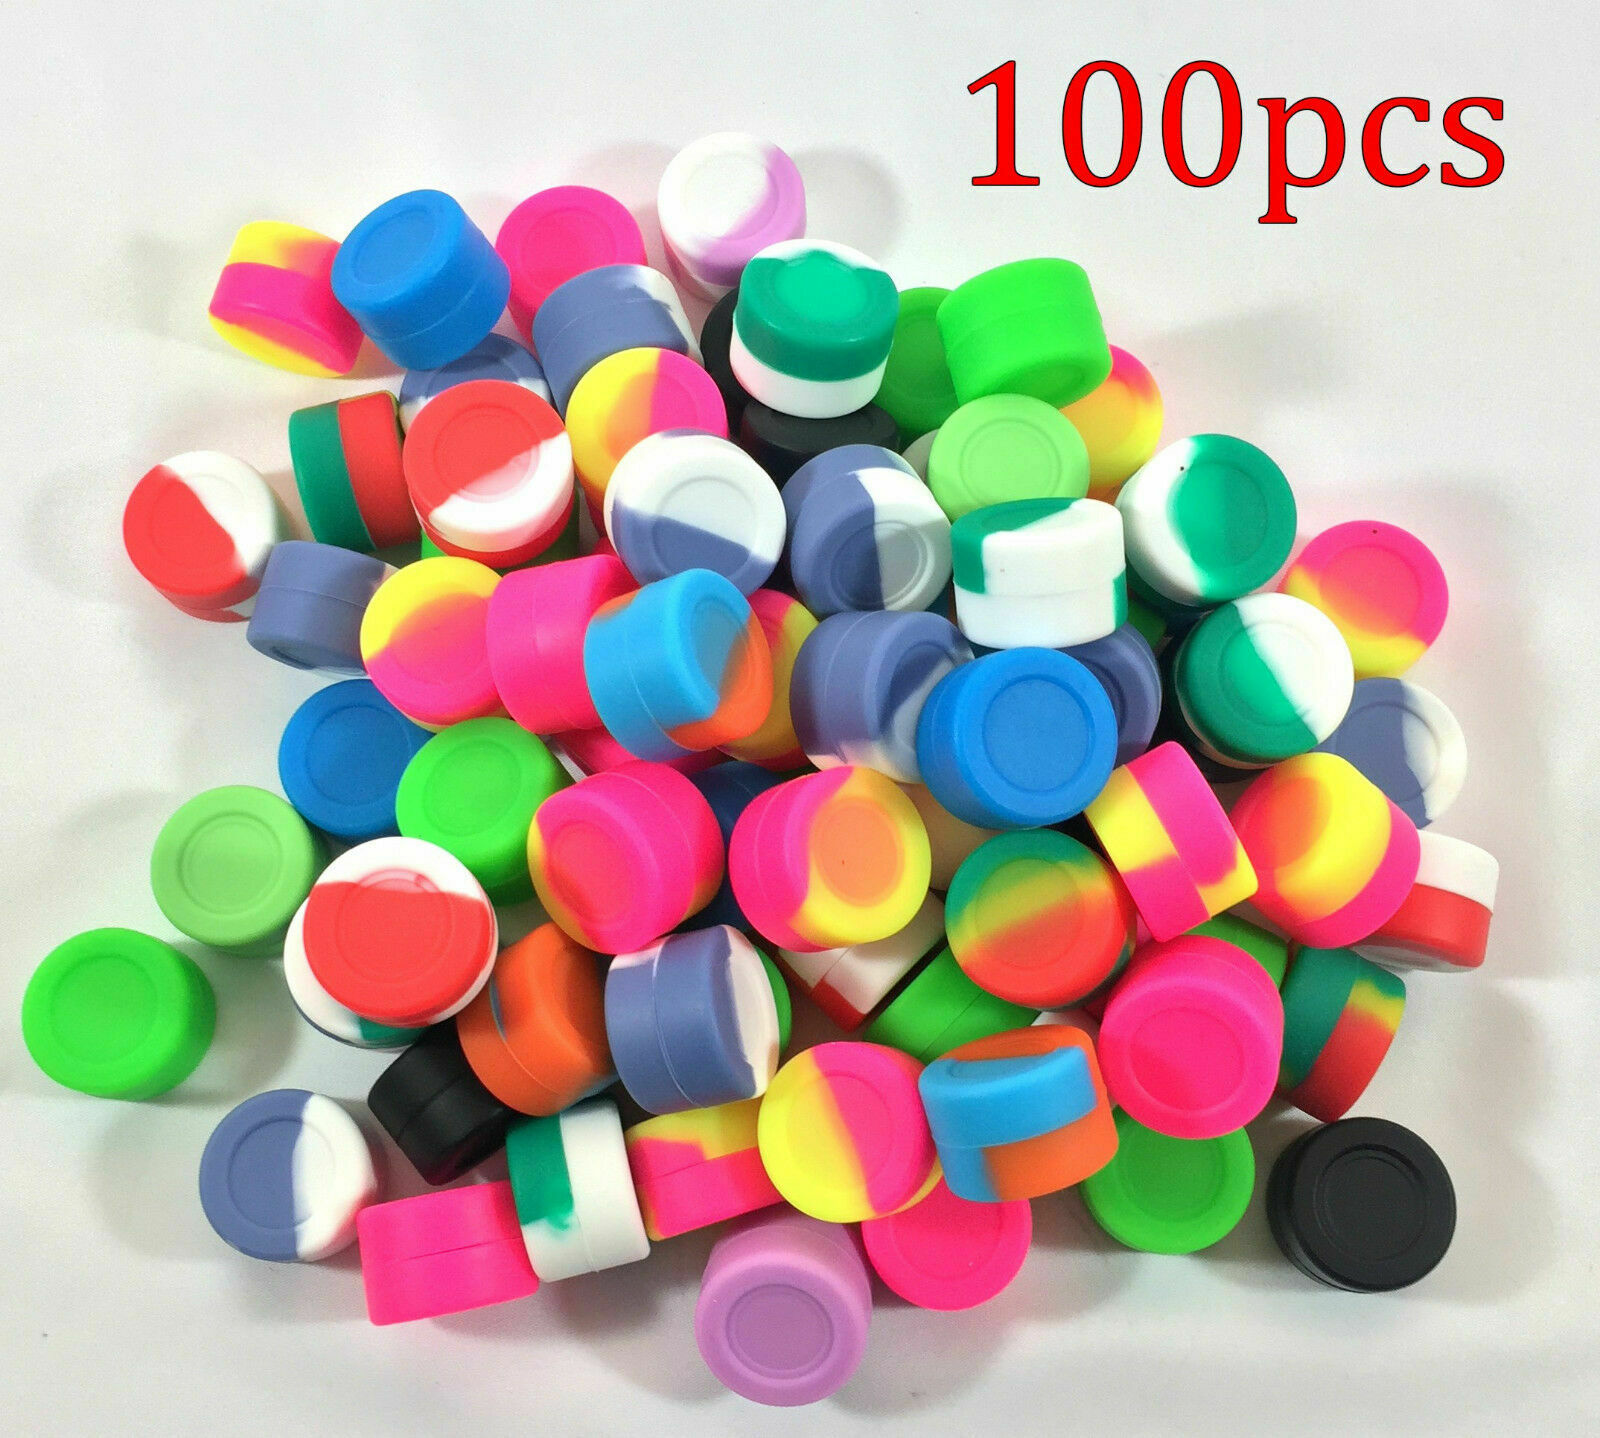 100 Pcs Mixed Colors Round Wholesale Lot  2ml Non-stick Silicone Container Jar